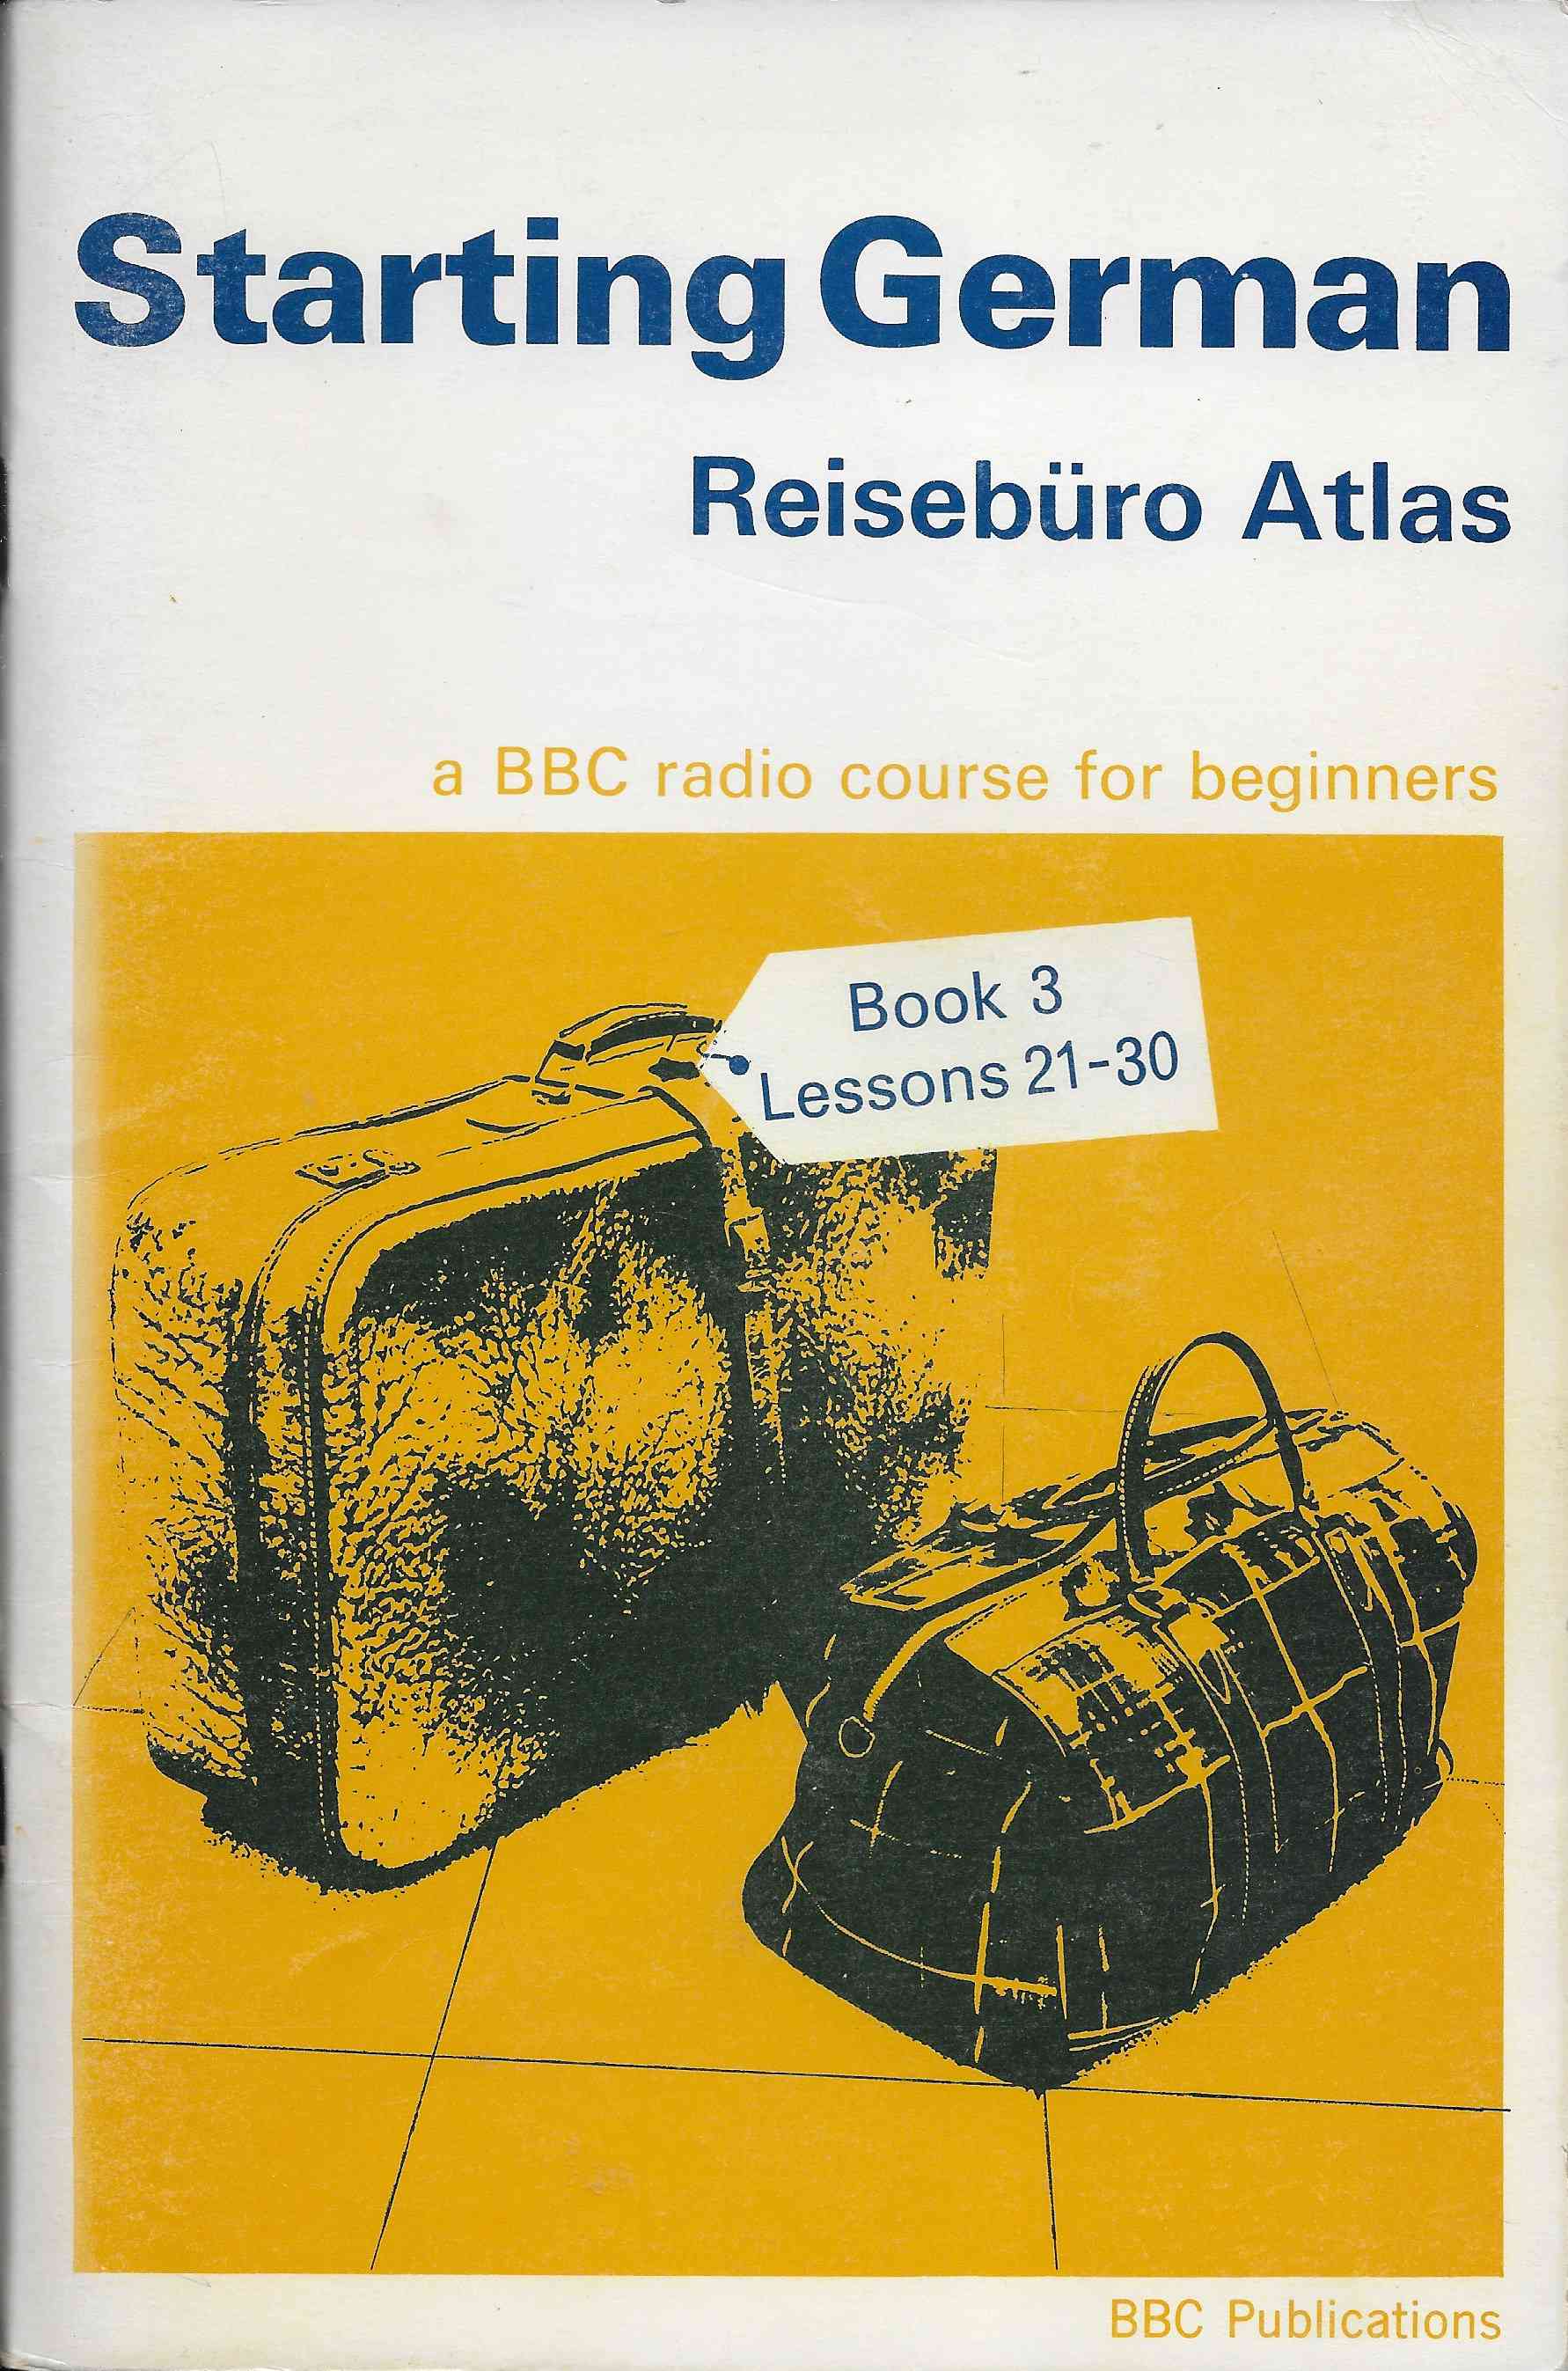 Picture of SBN 563 08477 4 Starting German - Book 3 by artist R. M. Oldnall / Edith R. Baer from the BBC books - Records and Tapes library